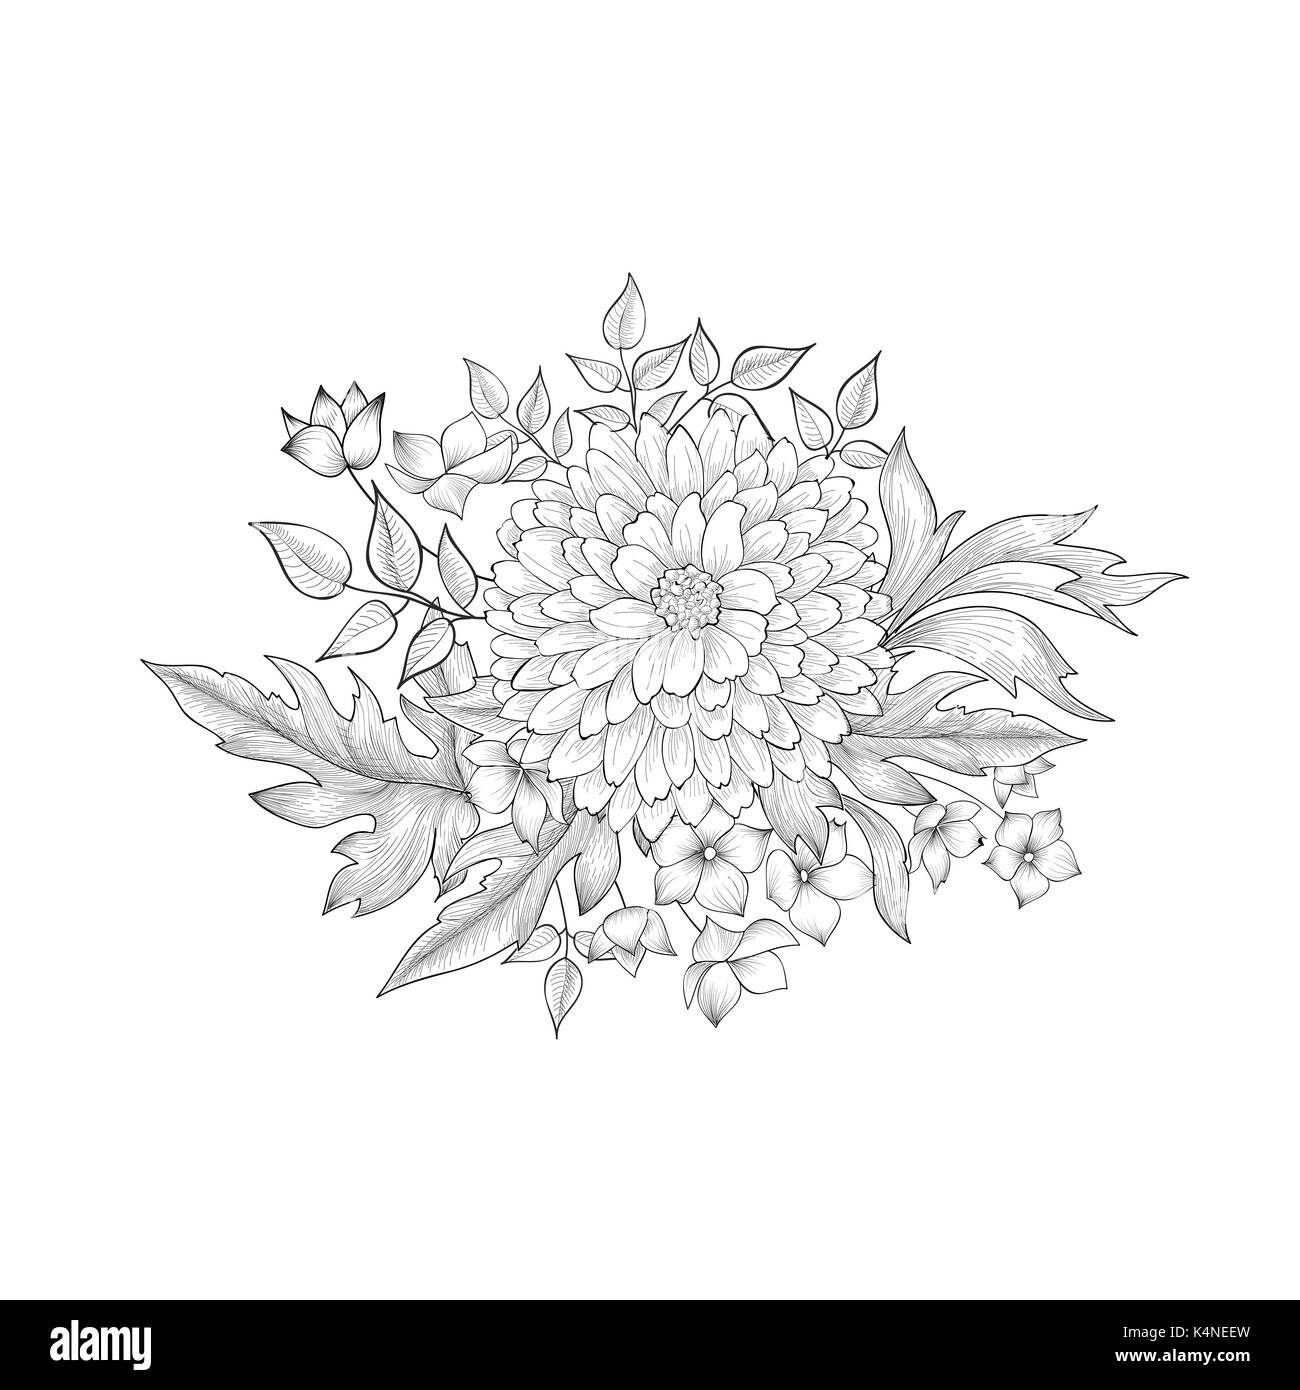 Floral bouquet. Flower engraving retro greeting card design Stock Vector